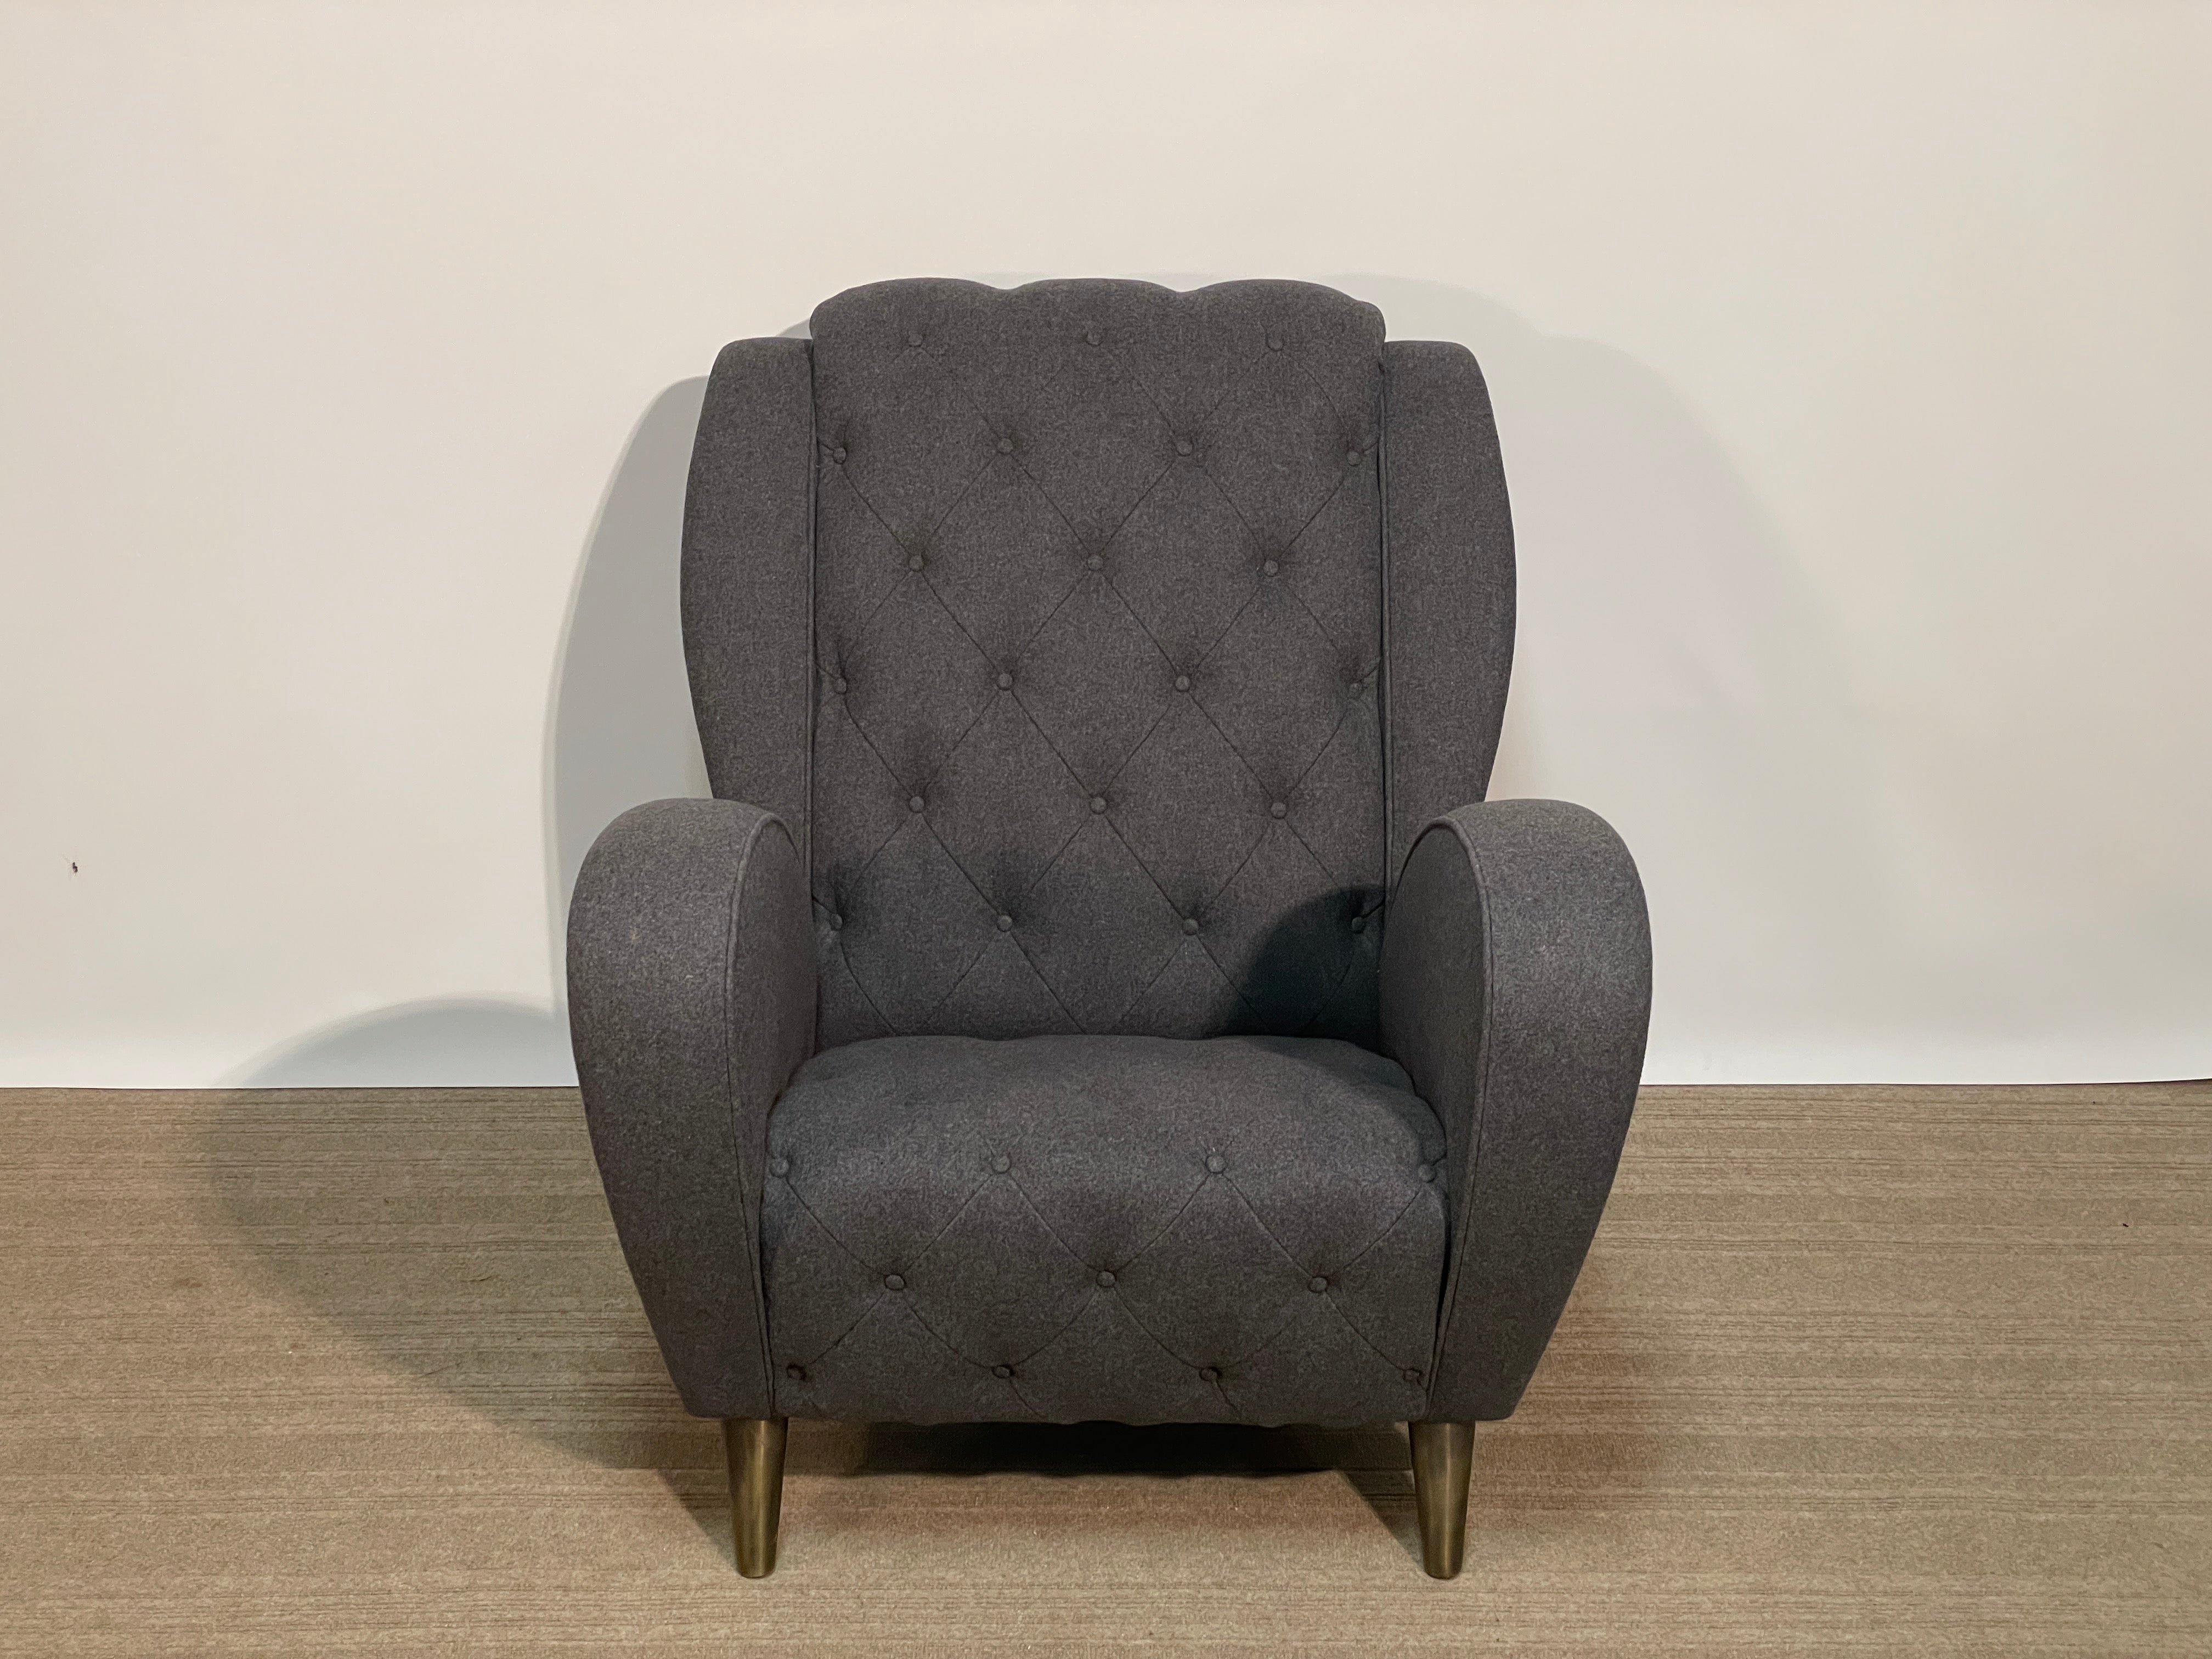 Jean de Merry's Andre arm chair is a subtle nod to the atomic Googie era merged with classic design style.  The body of this chair hovers above the ground supported by bronze MCM style legs finished in Antique Bronze.  The fabric is in excellent